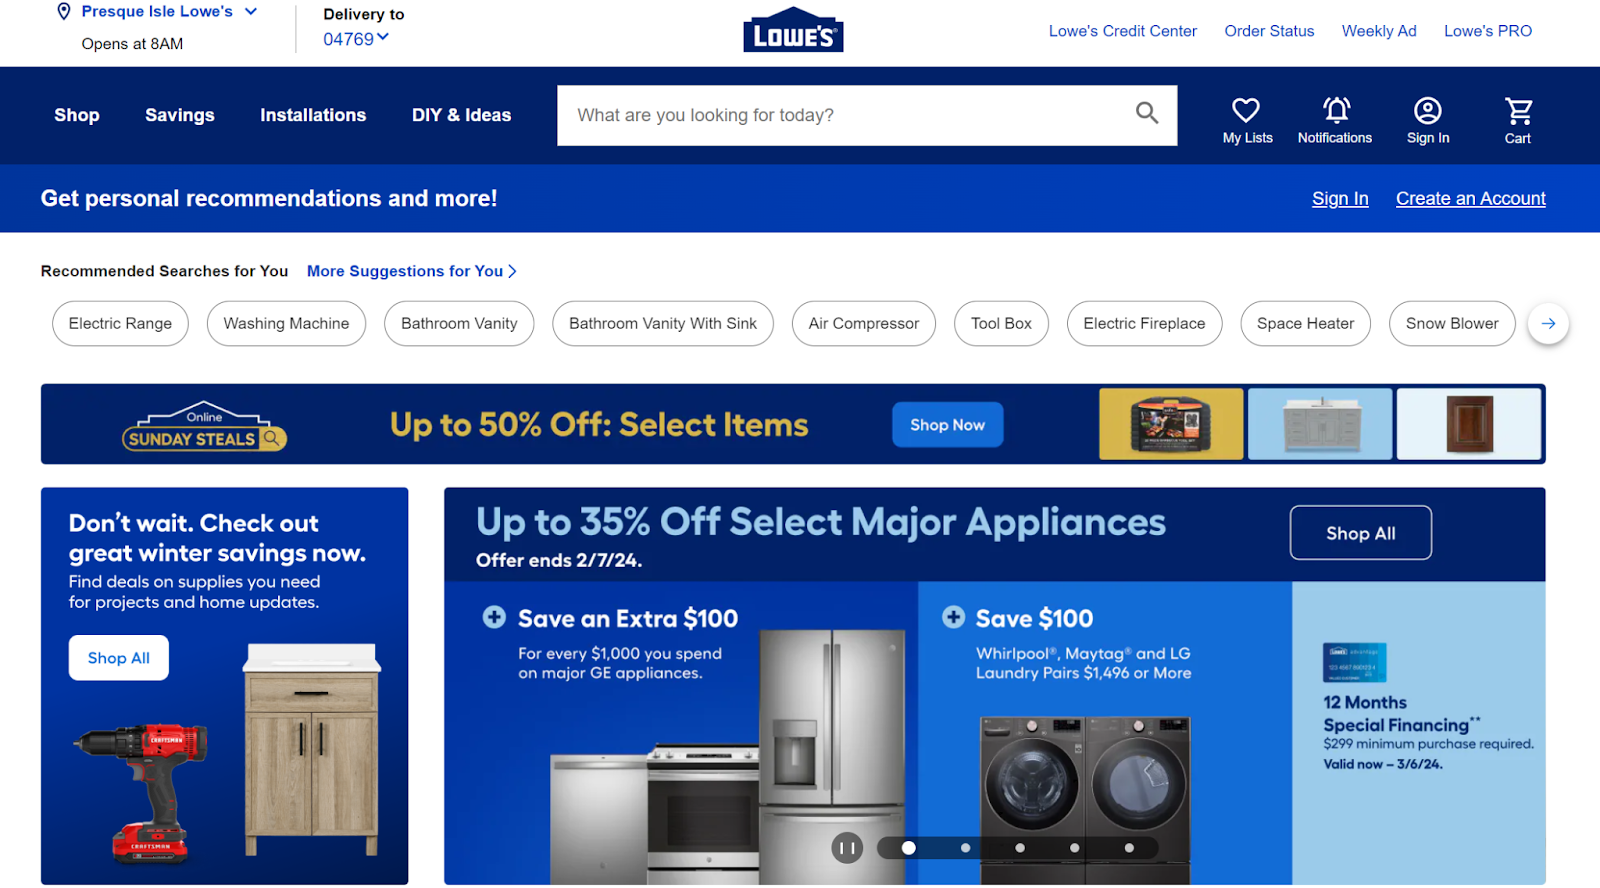 Lowe's website home page